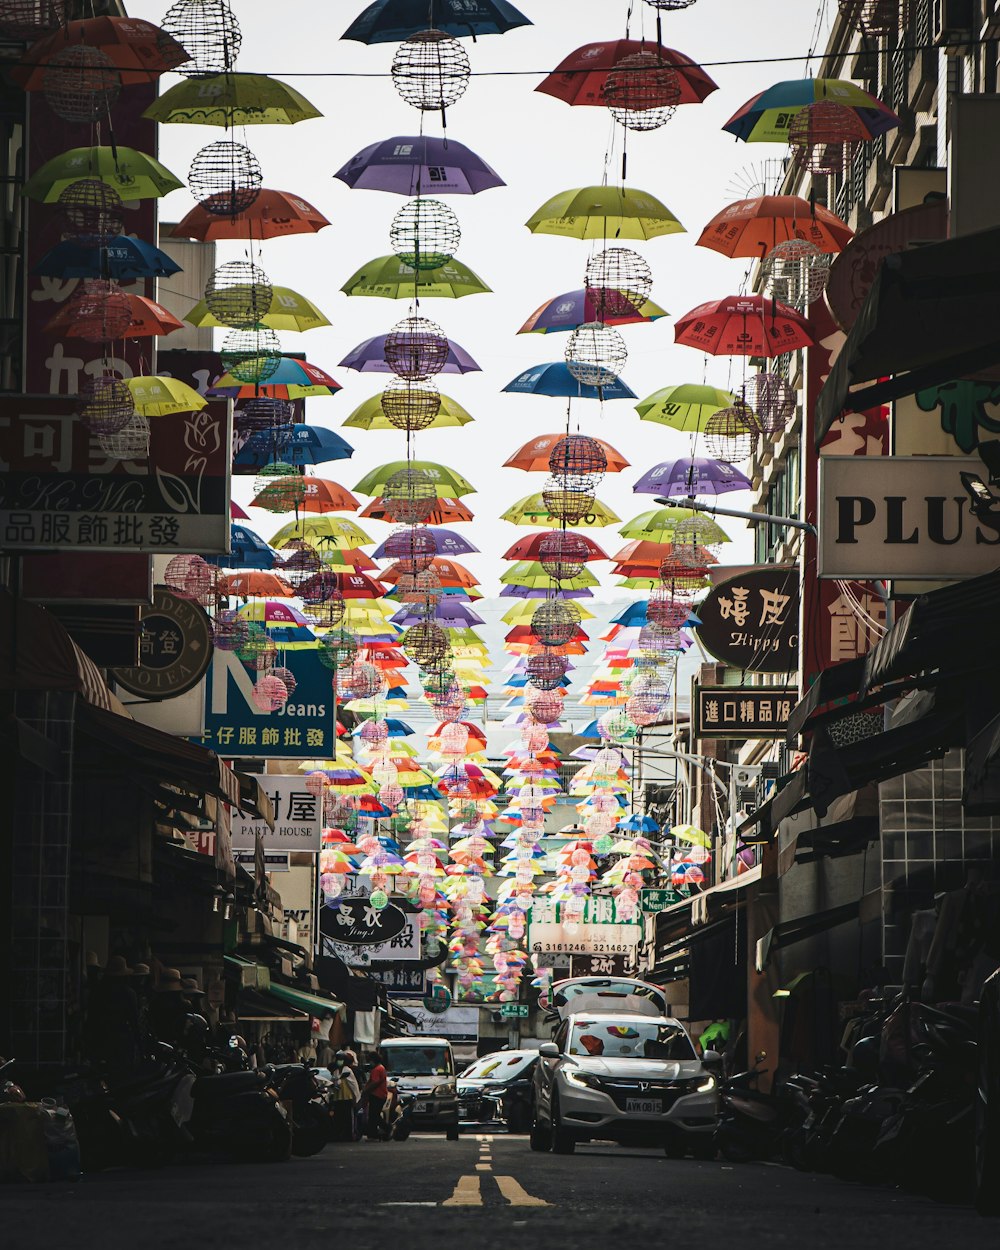 a city street filled with lots of colorful umbrellas